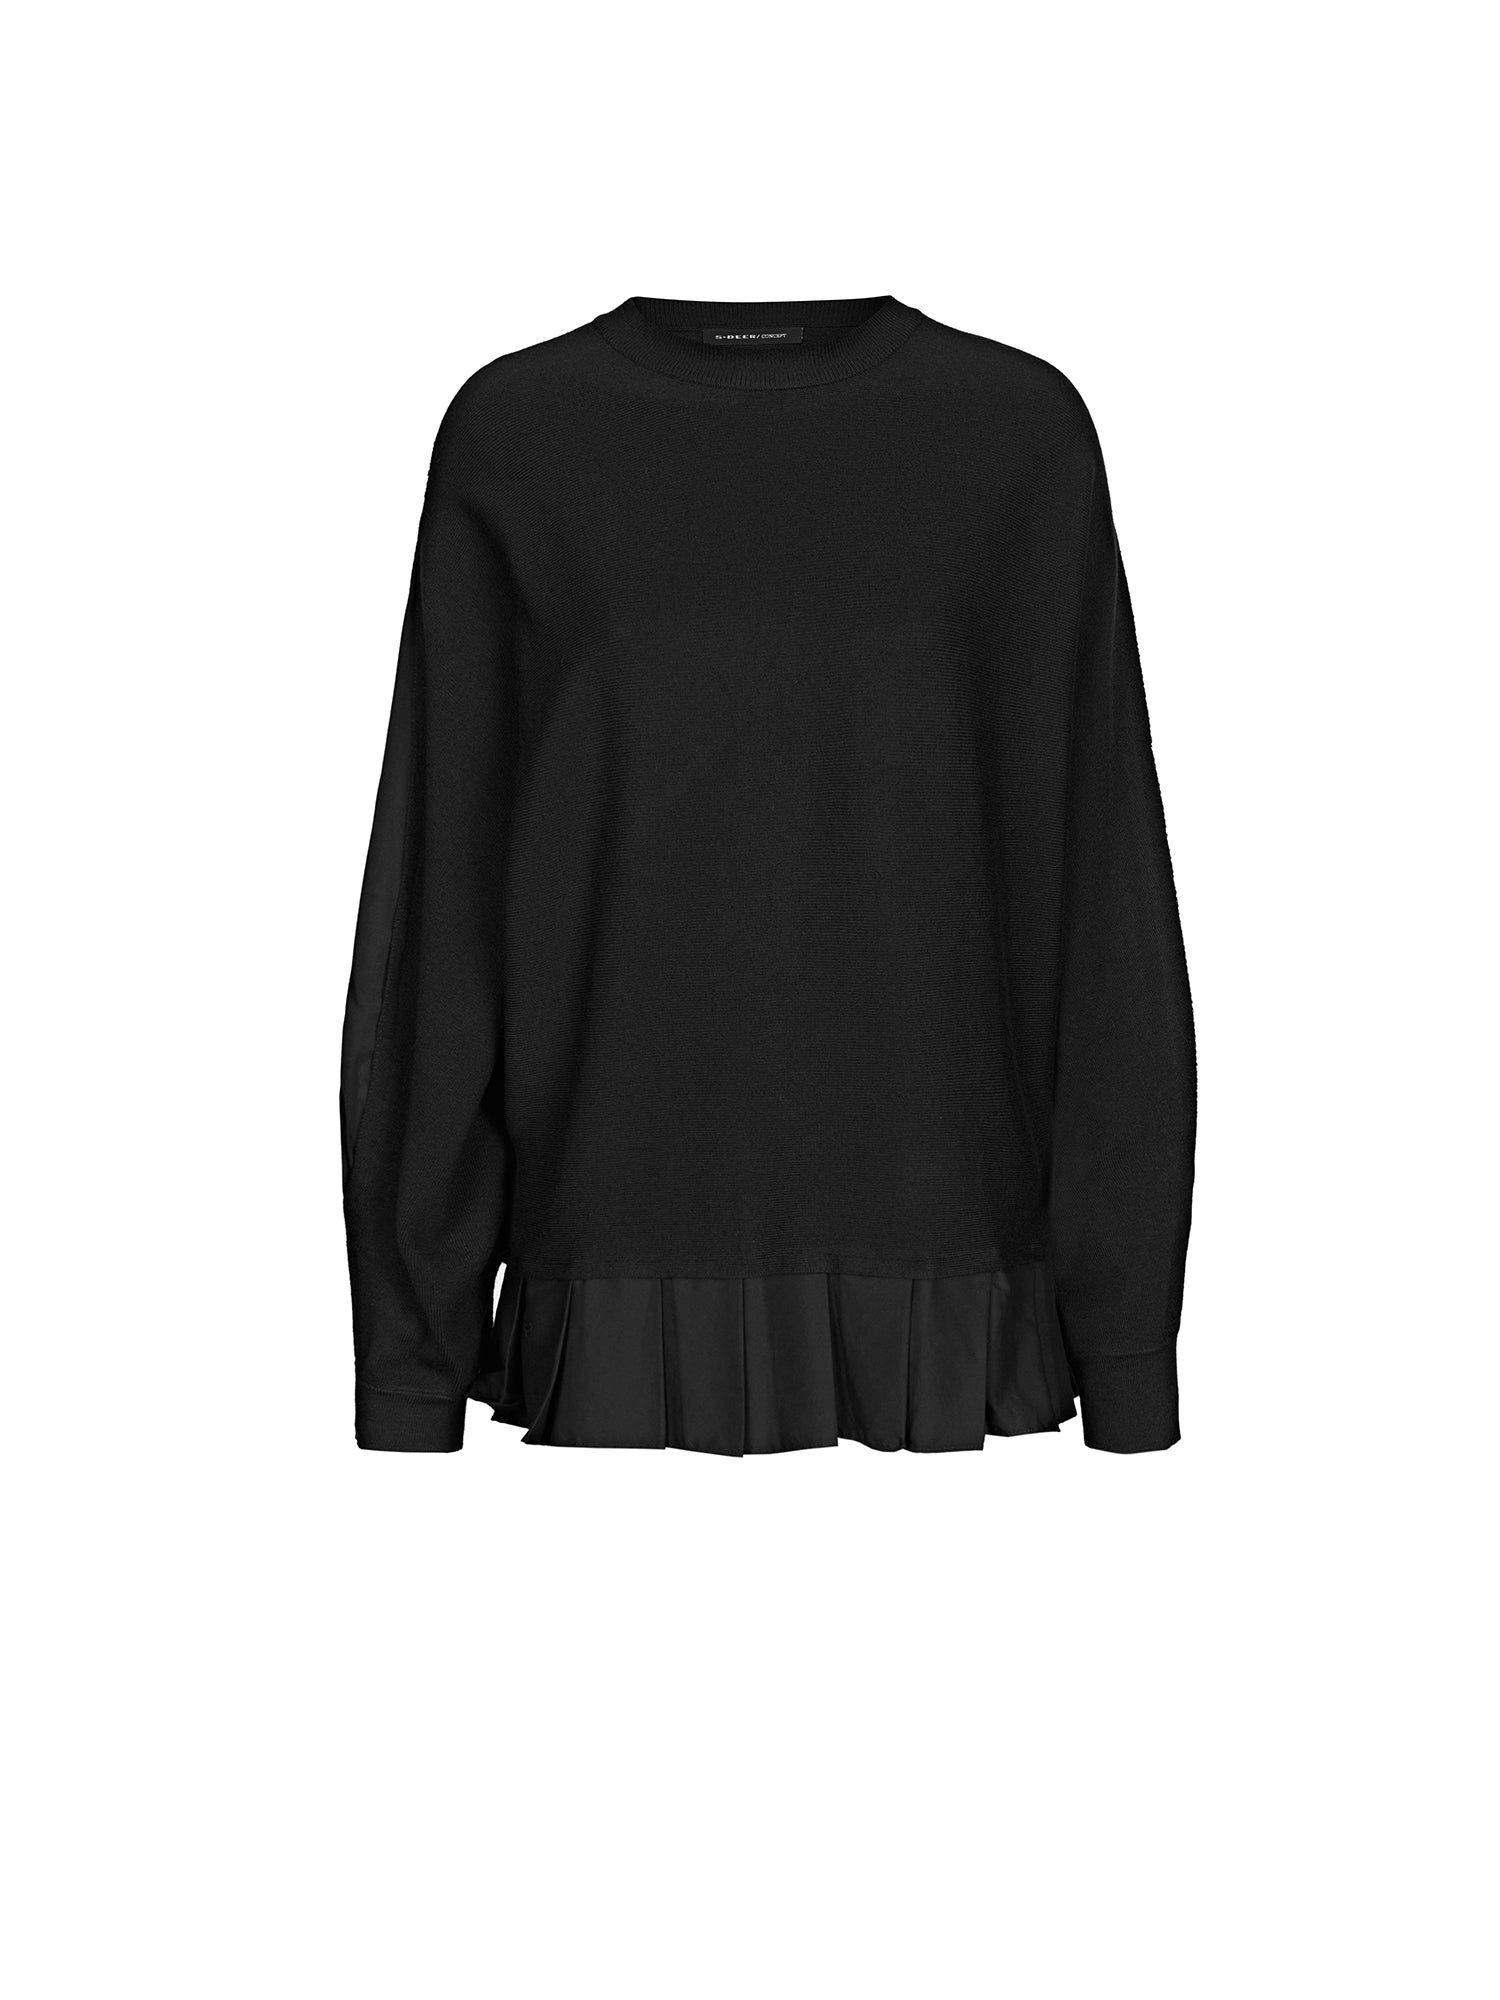 Ribbed Crew Neck Gathered Panel Loose-Fitting Sweater